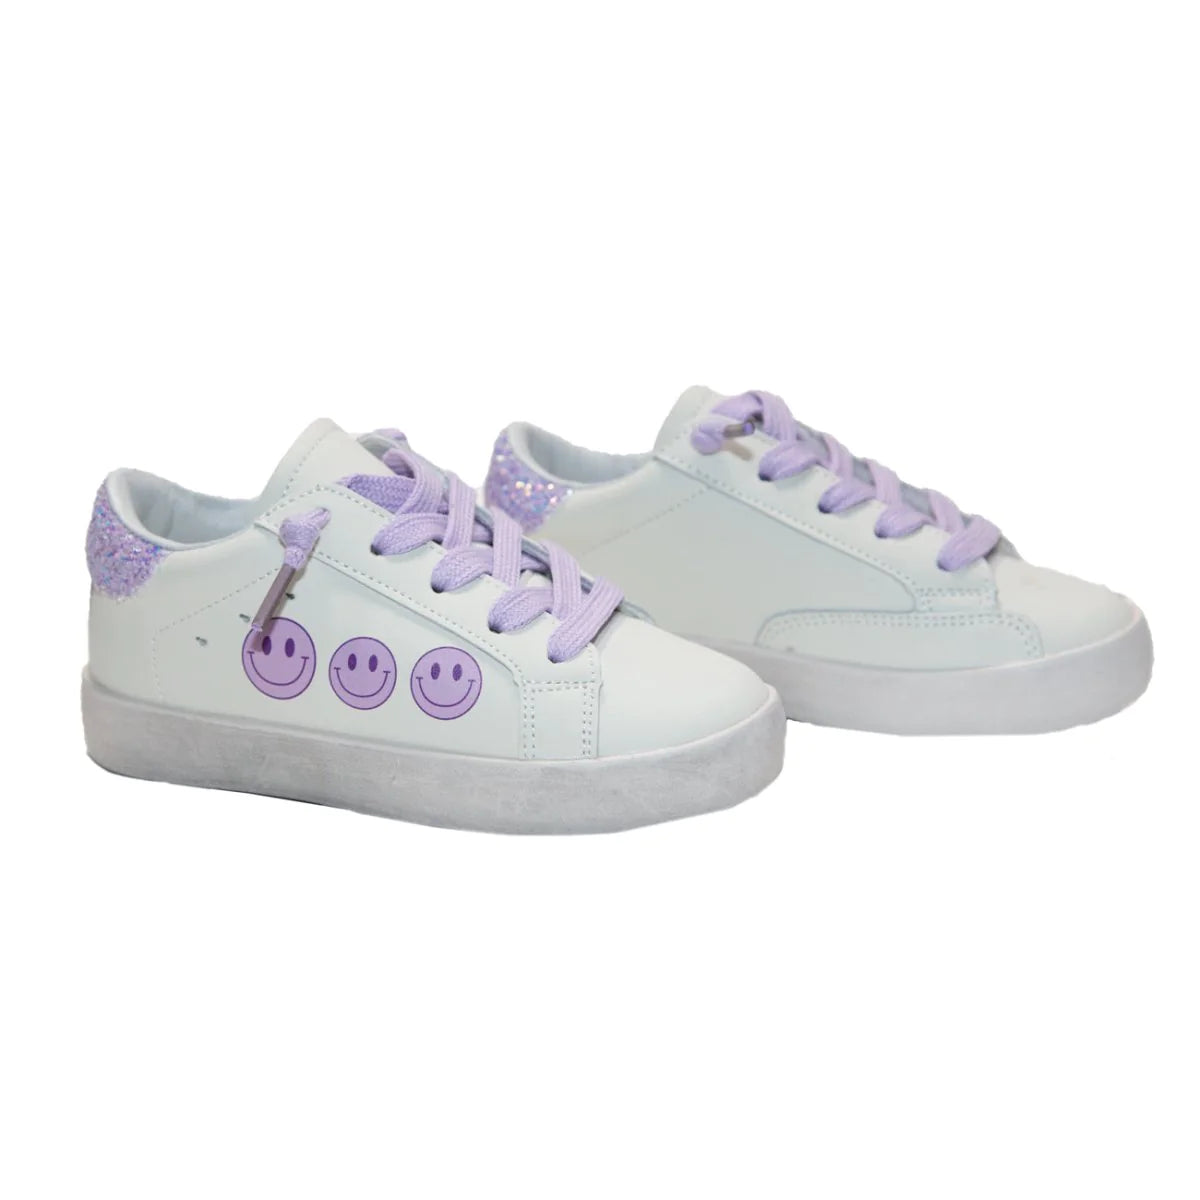 Mini Dreamers girls violet smiley face sneakers